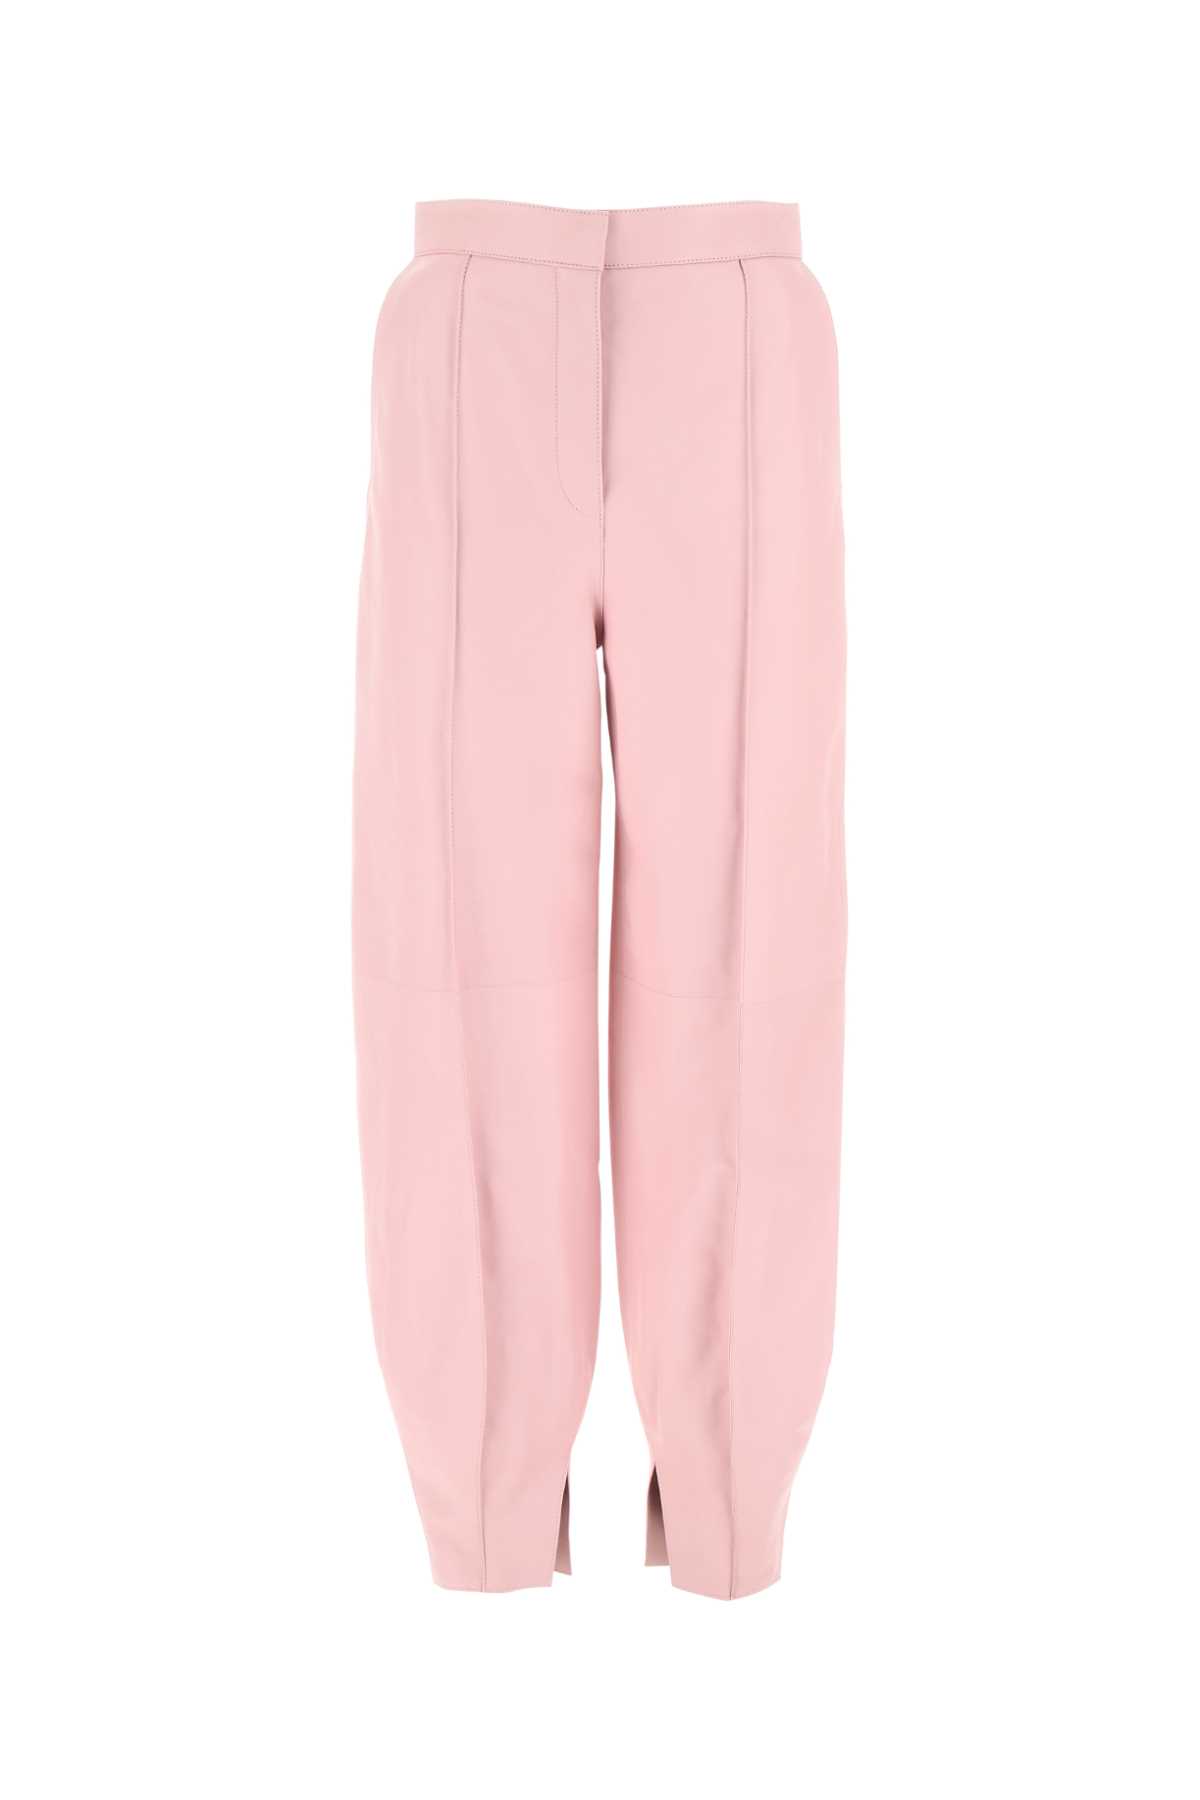 Pastel Pink Leather Pant